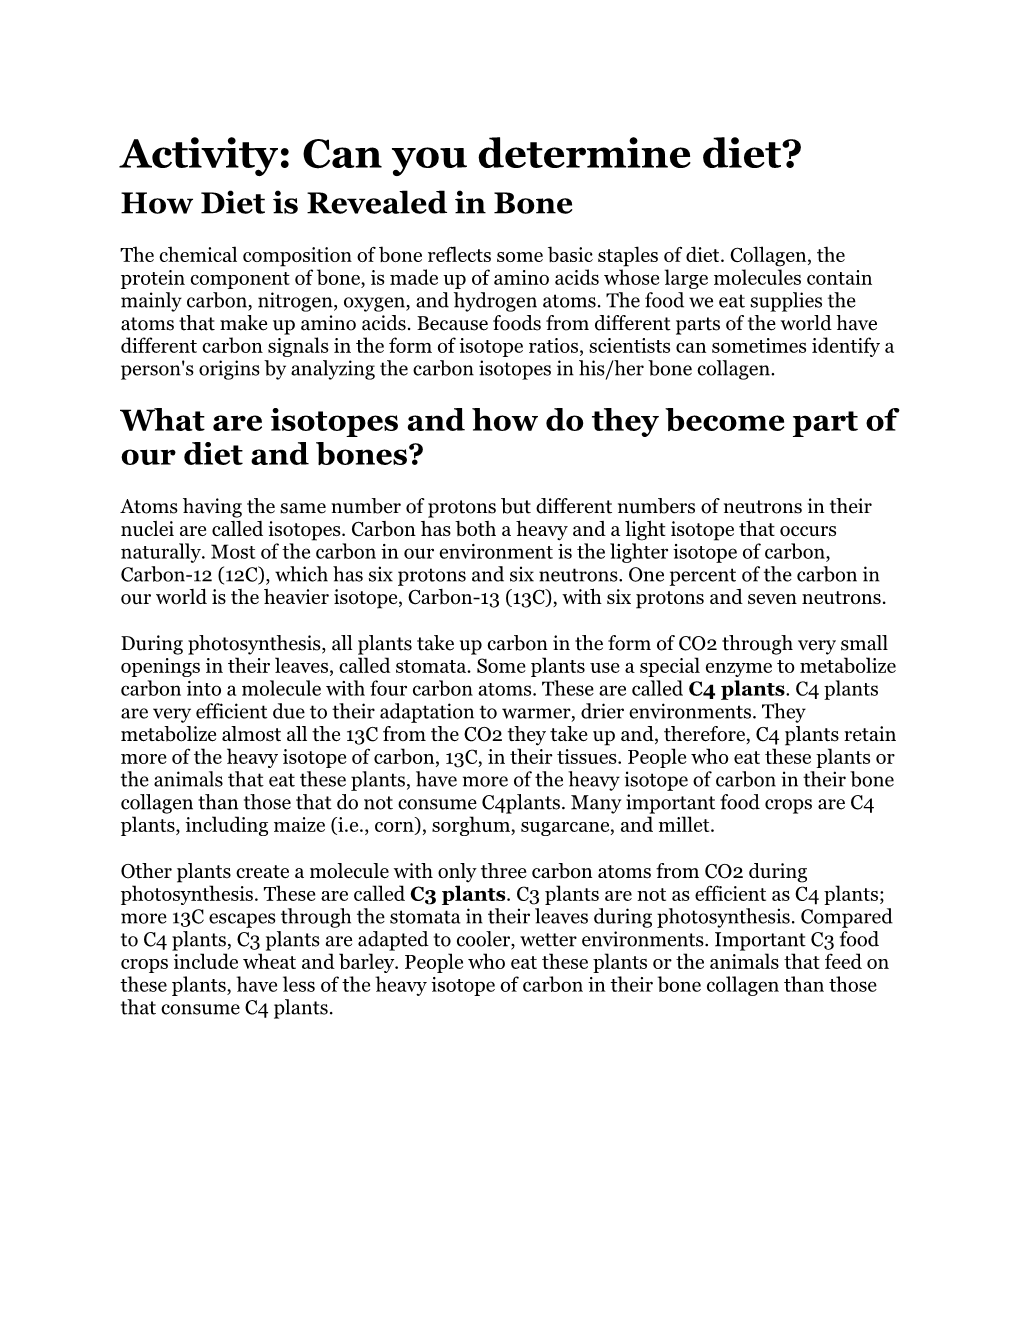 Activity: Can You Determine Diet? How Diet Is Revealed in Bone